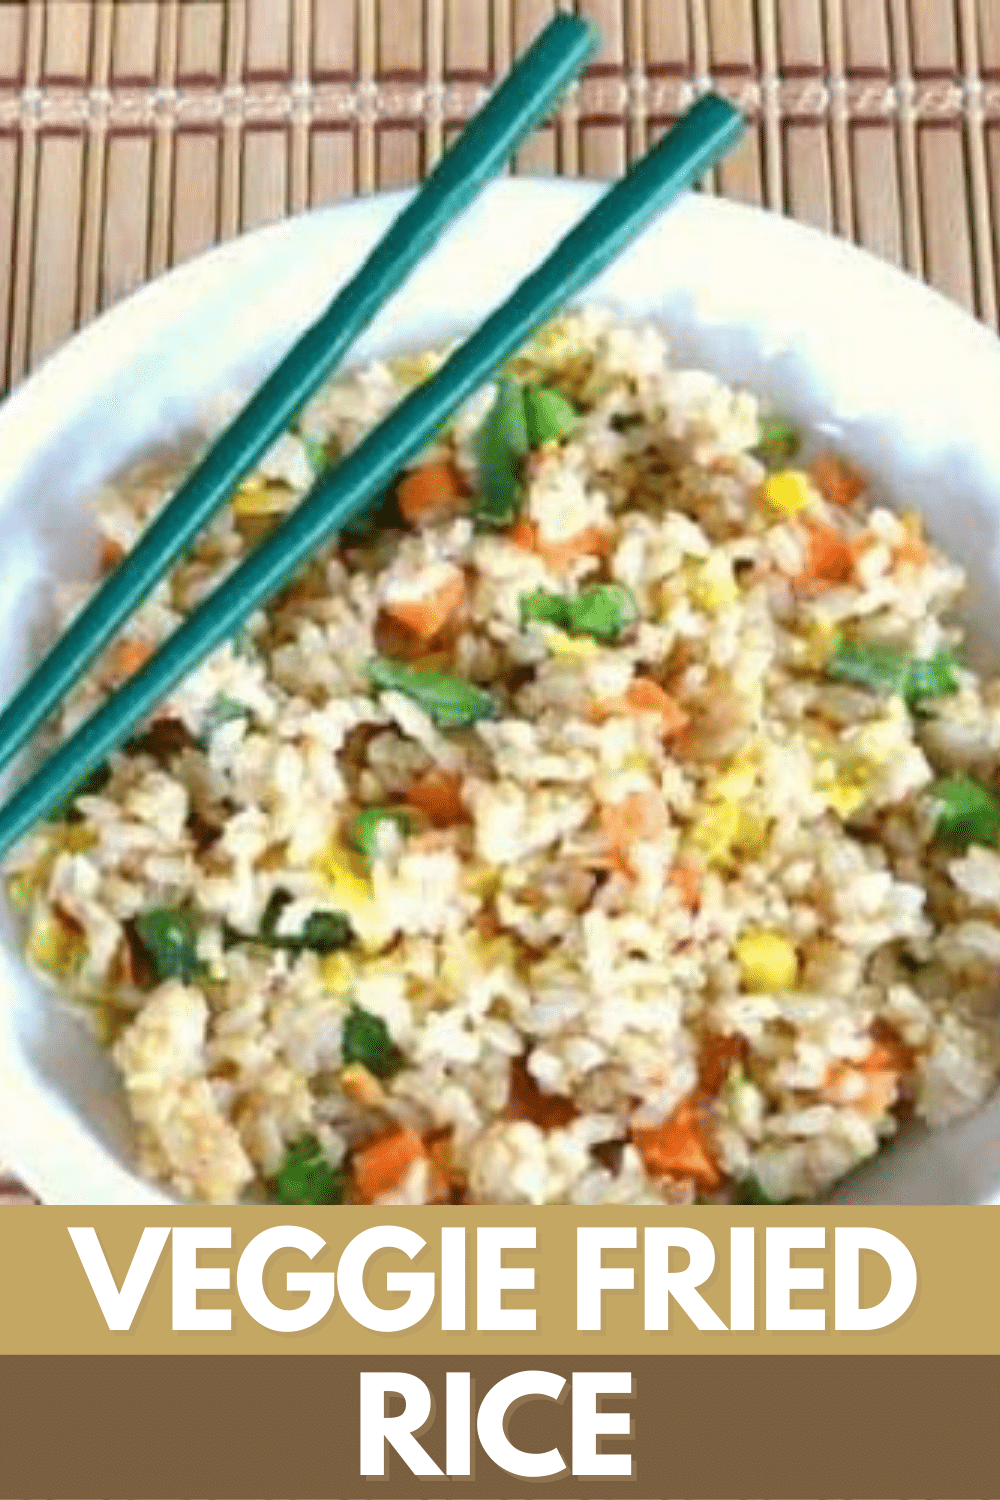 This easy veggie fried rice is full of whole grains and vegetables. If you add some egg and bacon for protein, it's a well-balanced meal all in one bowl! #friedrice #wholegrains #vegetables #veggiefriedrice via @wondermomwannab